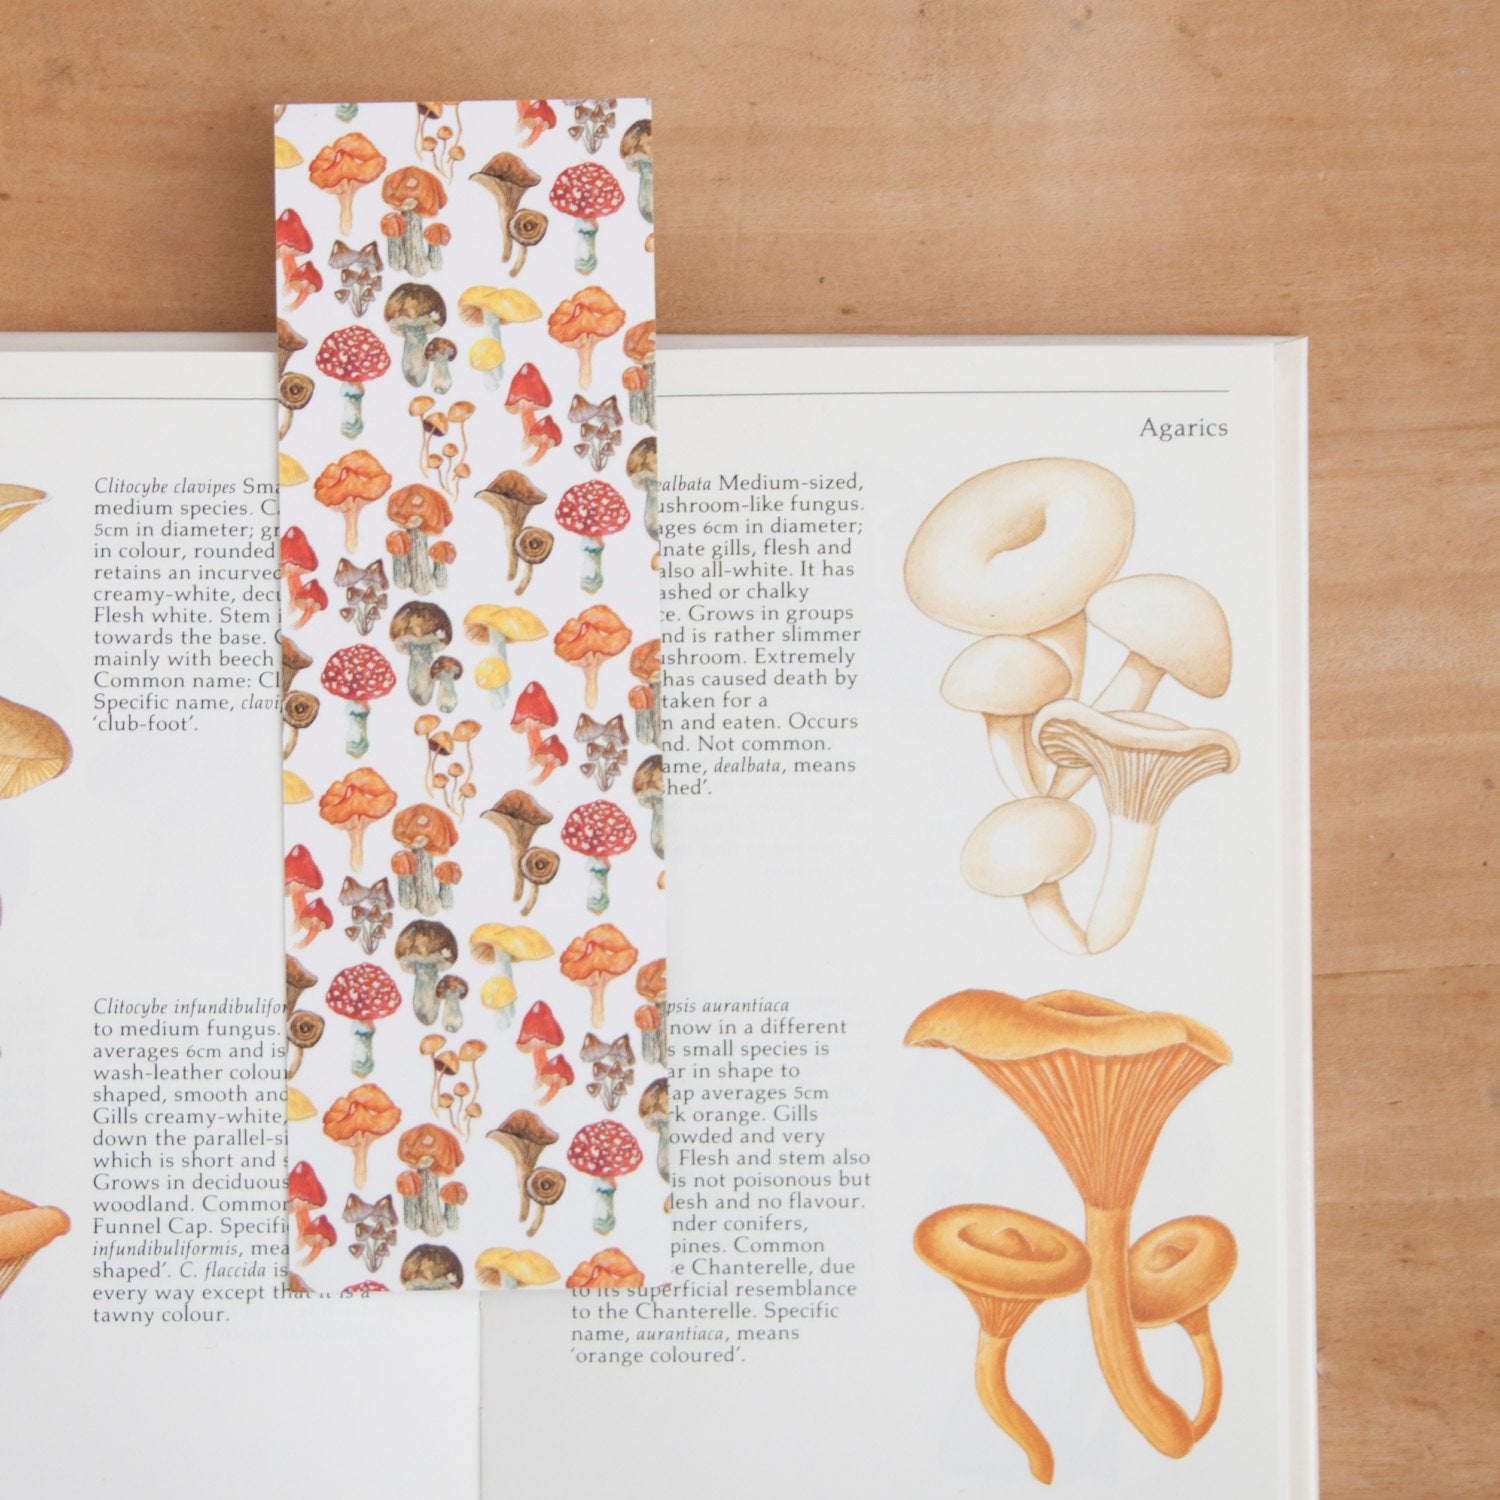 The cutest mushroom bookmark. This is a free pattern by Weiisoli